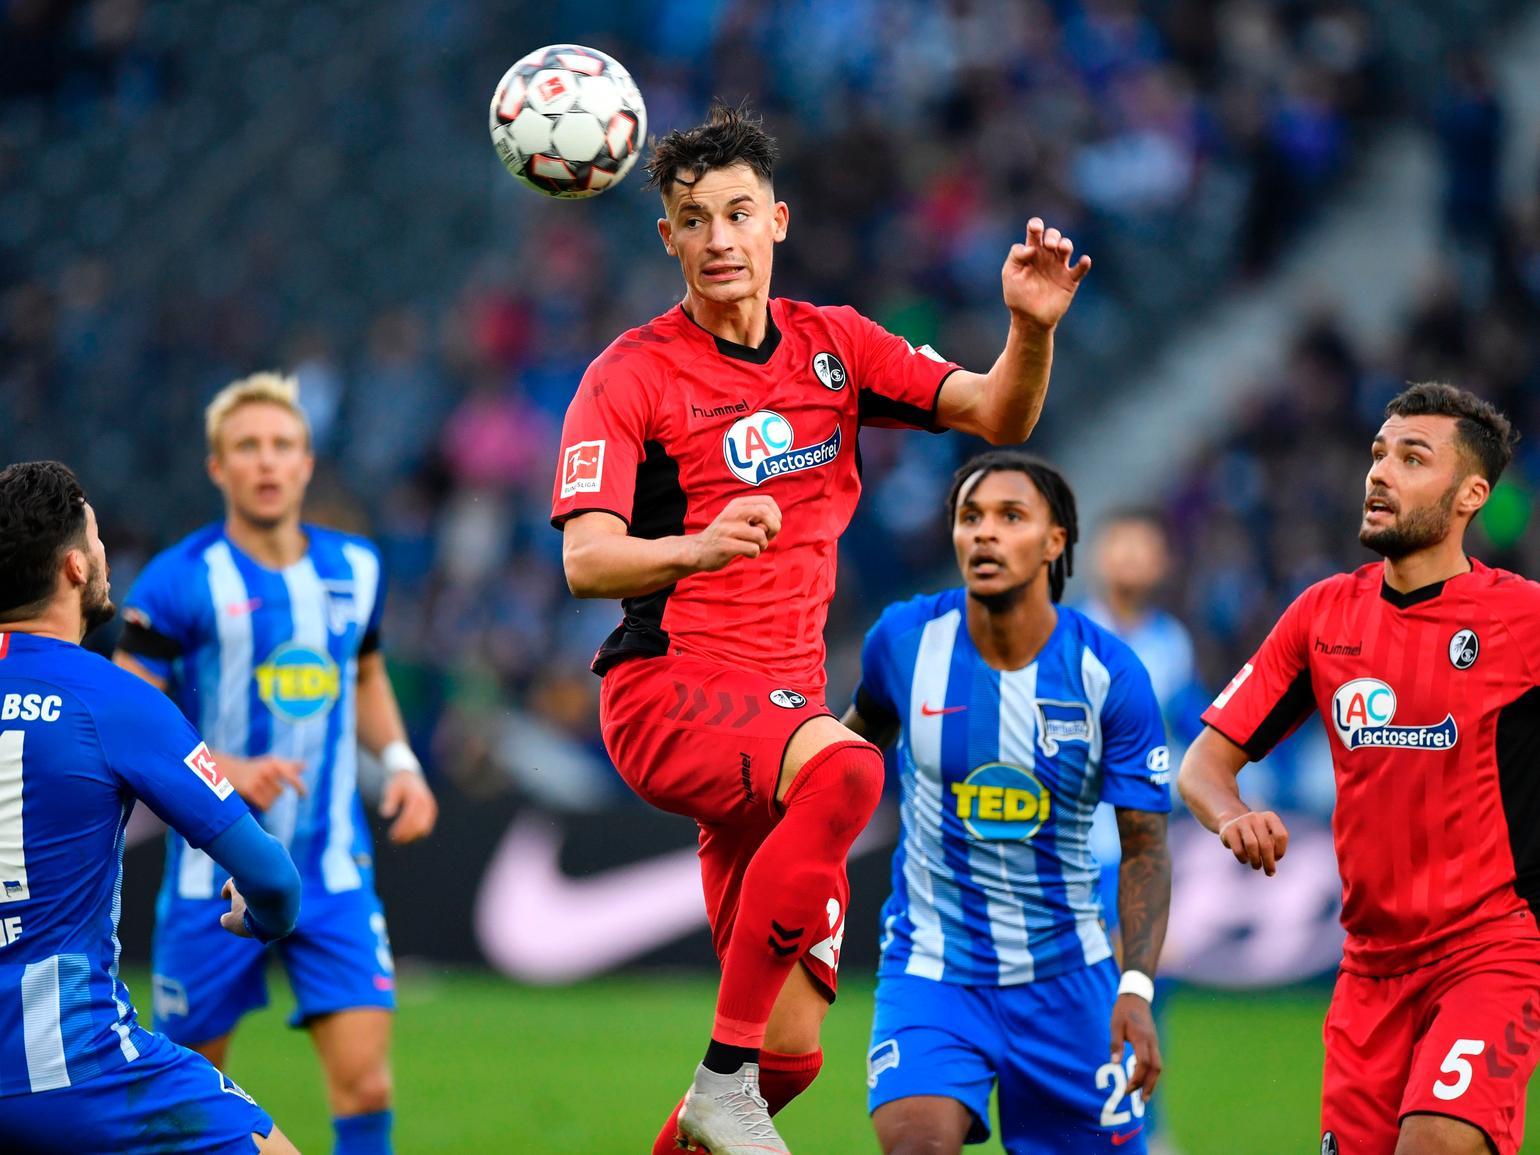 Leeds United could be set to land a real coup next summer, with Bundesliga side SC Freiburg reportedly ready to discuss a "cut-price" deal for their defender Robin Koch. He is target of RB Leipzig and Benfica, too. (A Bola)